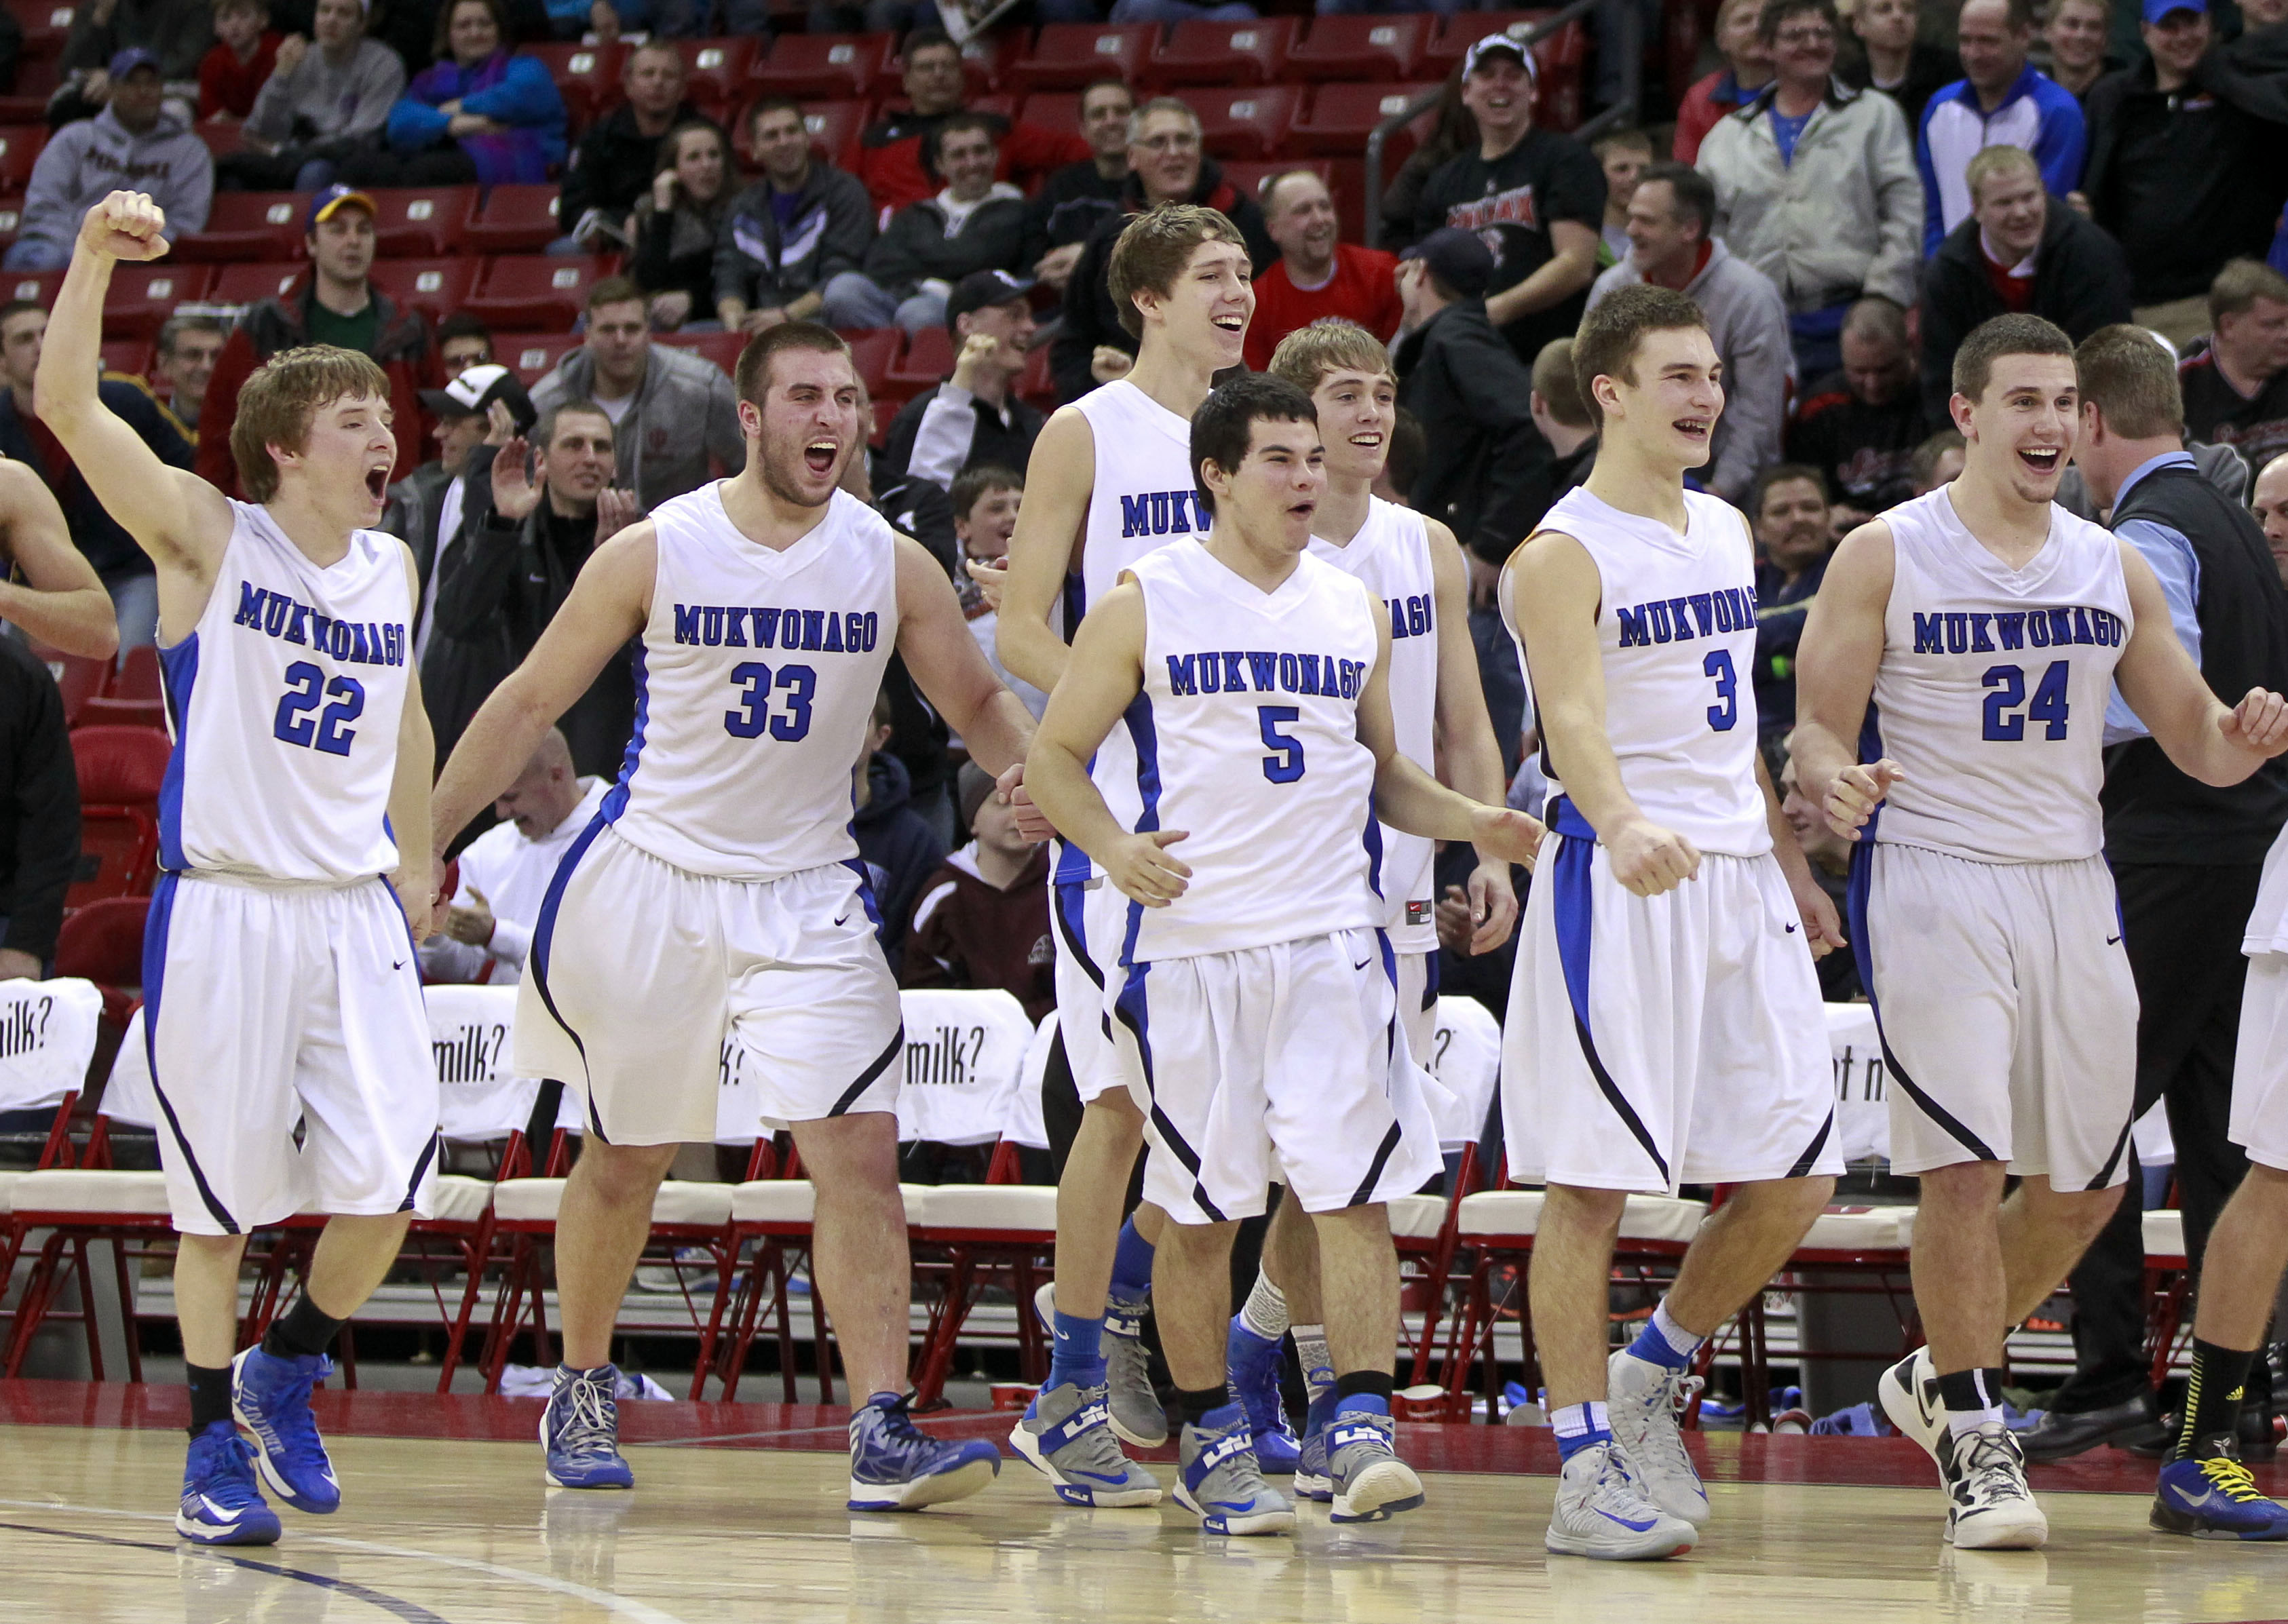 Mukwonago Indians teammates celebrate their 64-47 win over Milwaukee King in a Division 1 semifinal WIAA high school basketball game in Madison, Wis. The Wisconsin state Senate is set to vote on a bill that would make it harder to force public schools to drop American Indian nicknames and logos. (AP Photo/Andy Manis, File)